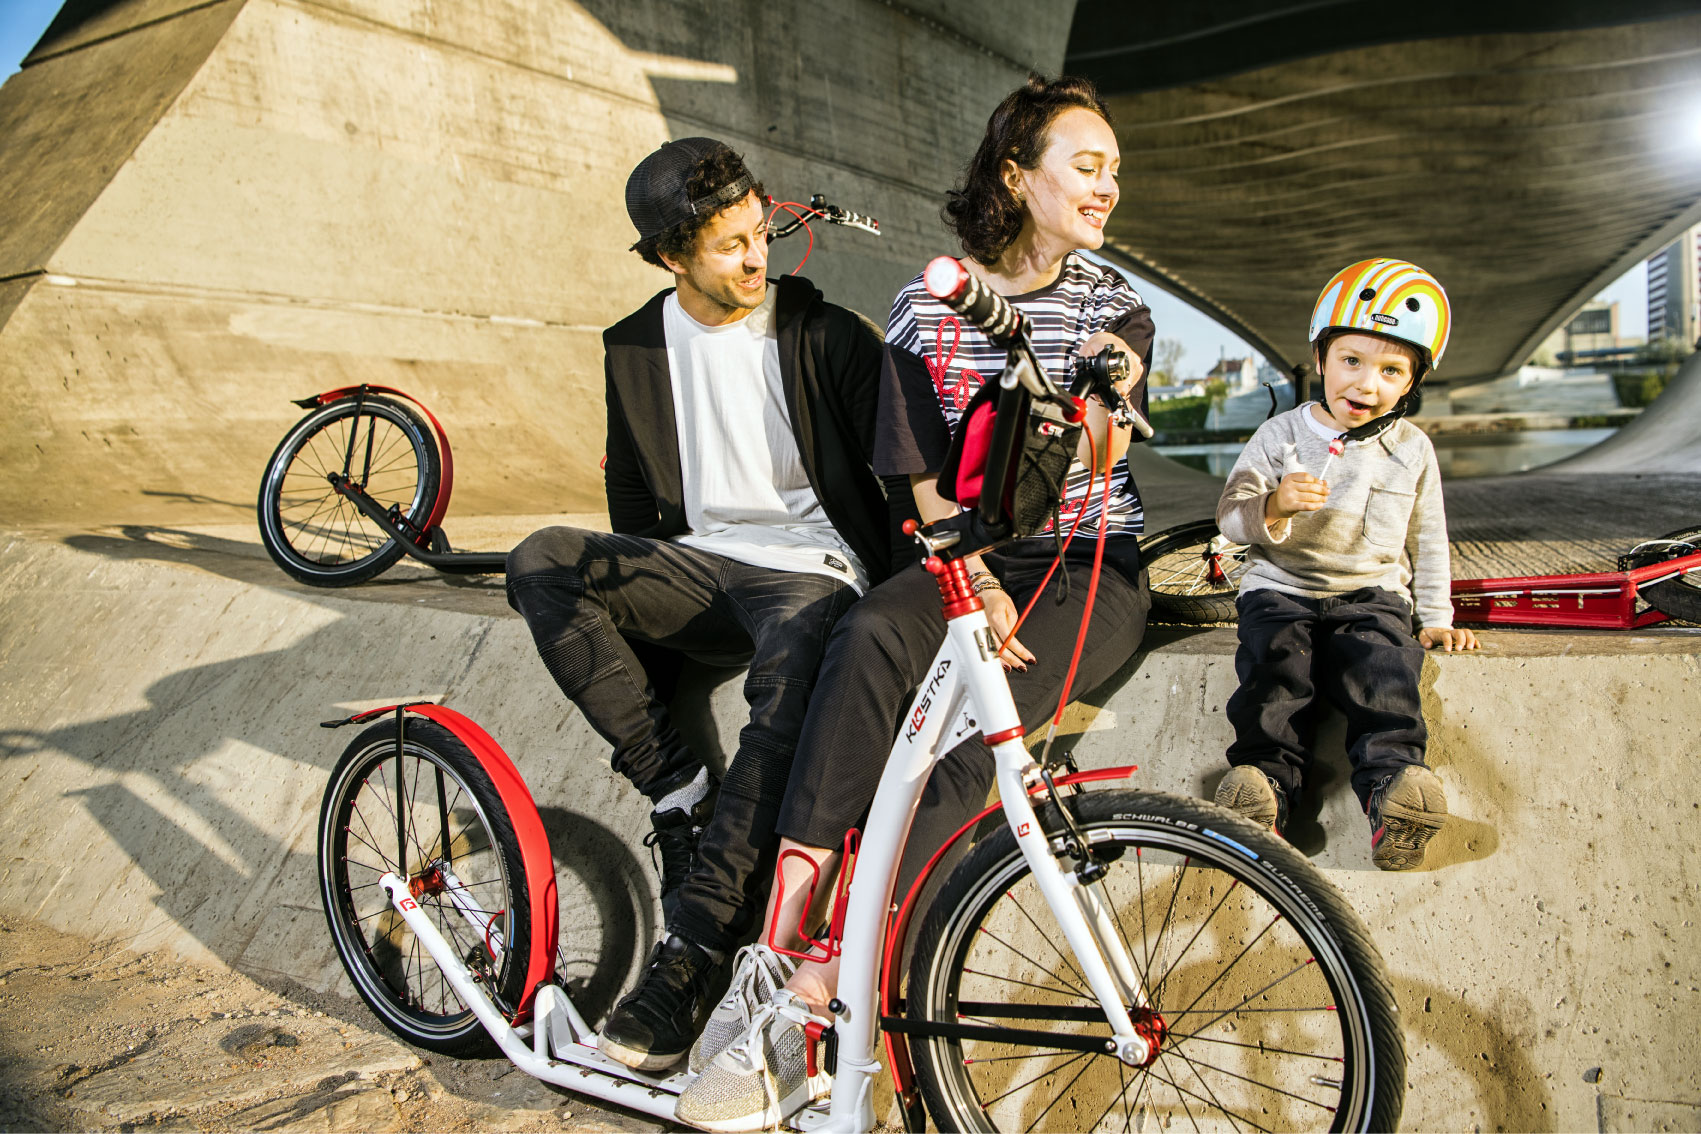 Looking for fun for the whole family? Try footbikes!